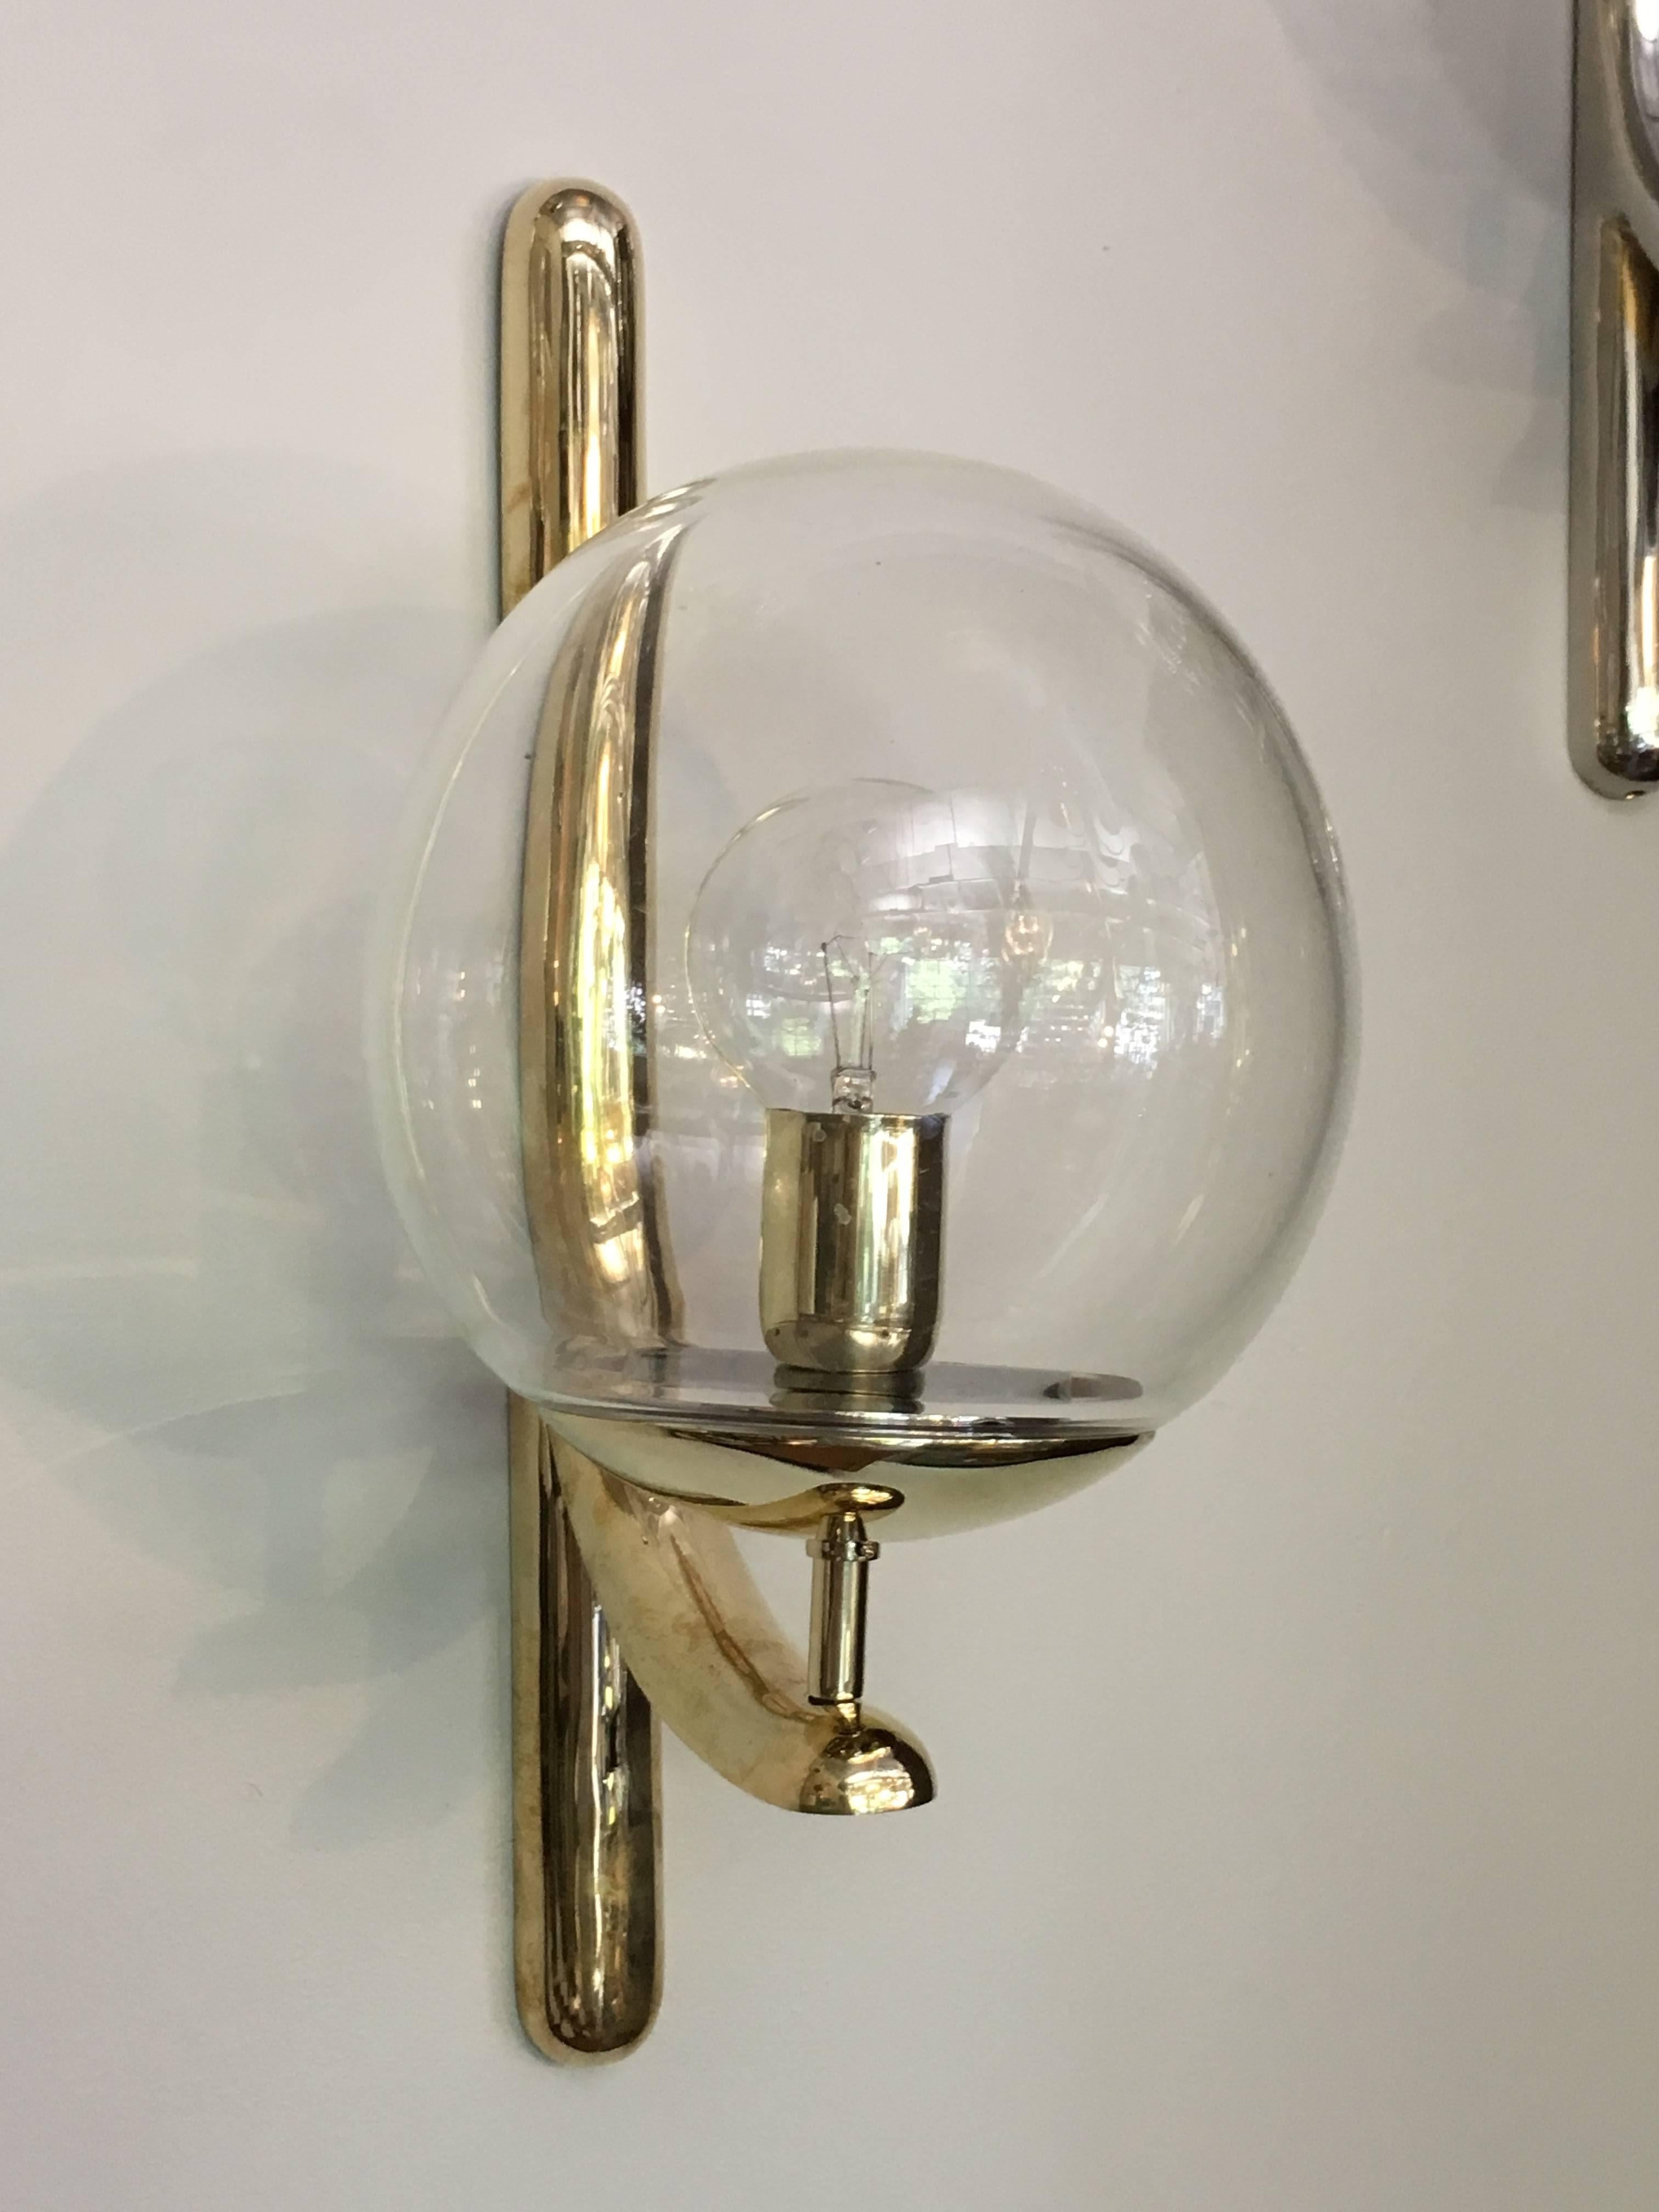 Impressive cast brass wall lights with handblown glass ball shades; signed Venini Italia '85.
These are available in three finishes: the original chrome and also in polished or brushed brass.

Avantgarden Ltd. cultivates unexpected and exceptional